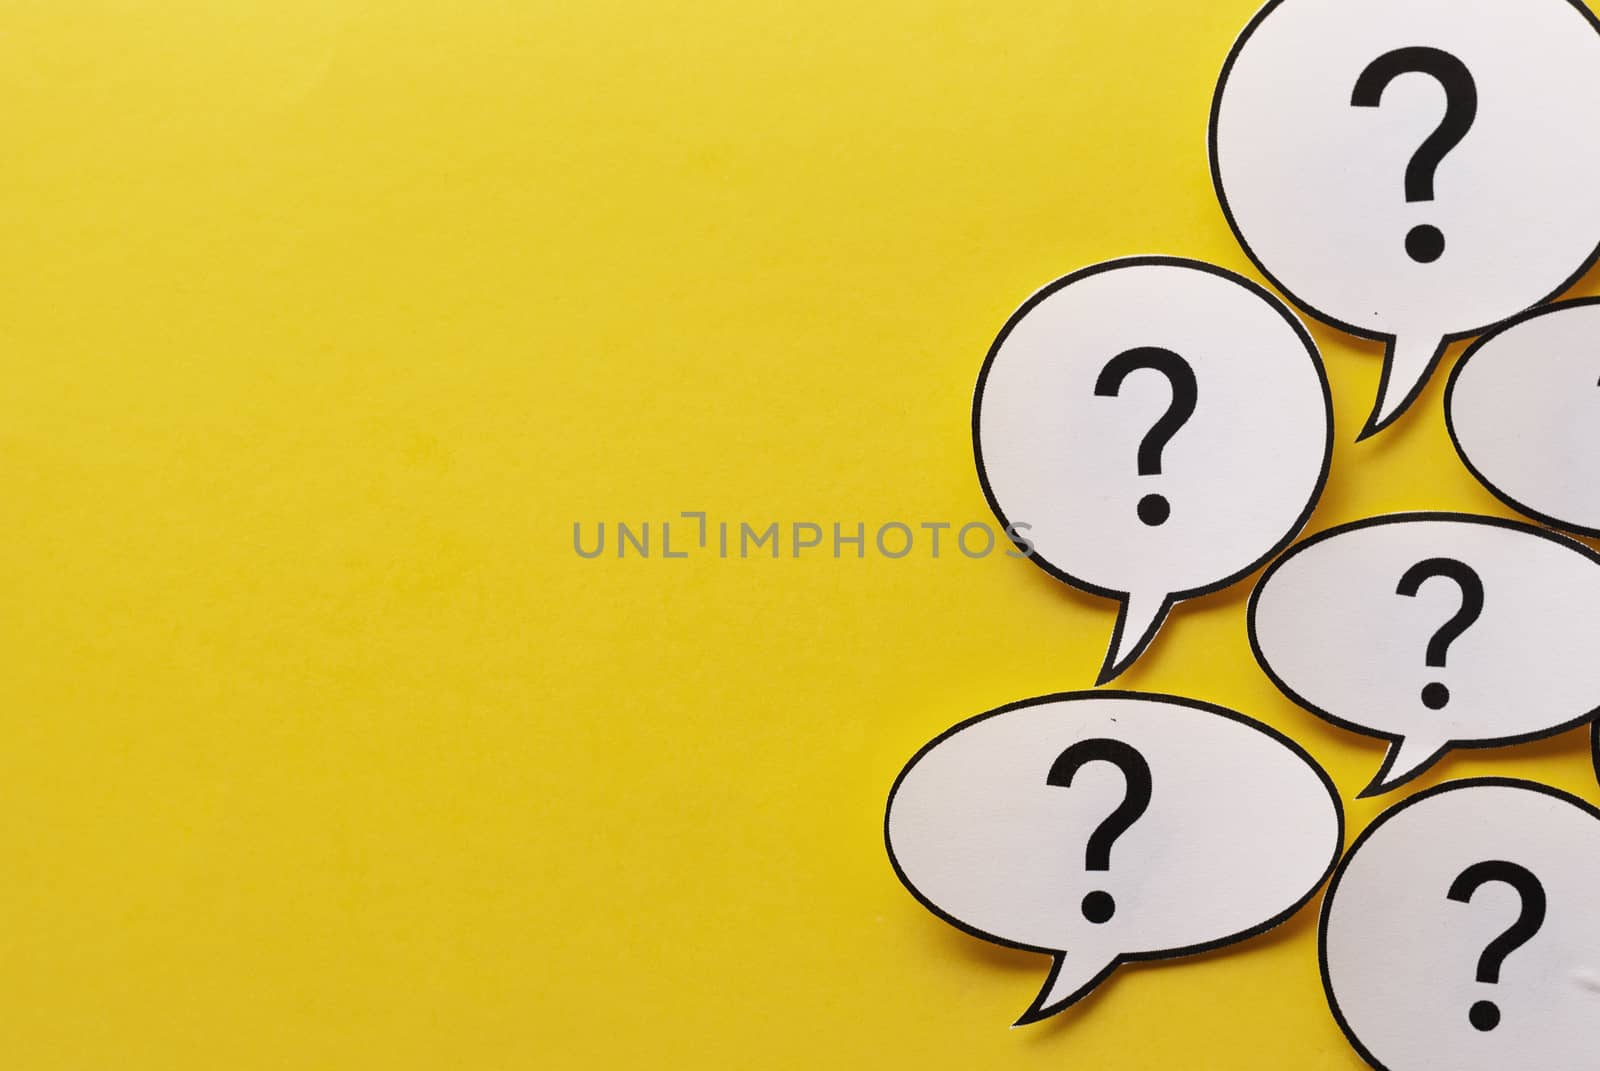 Border of question marks in speech or thought bubbles over a vivid yellow background with copy space